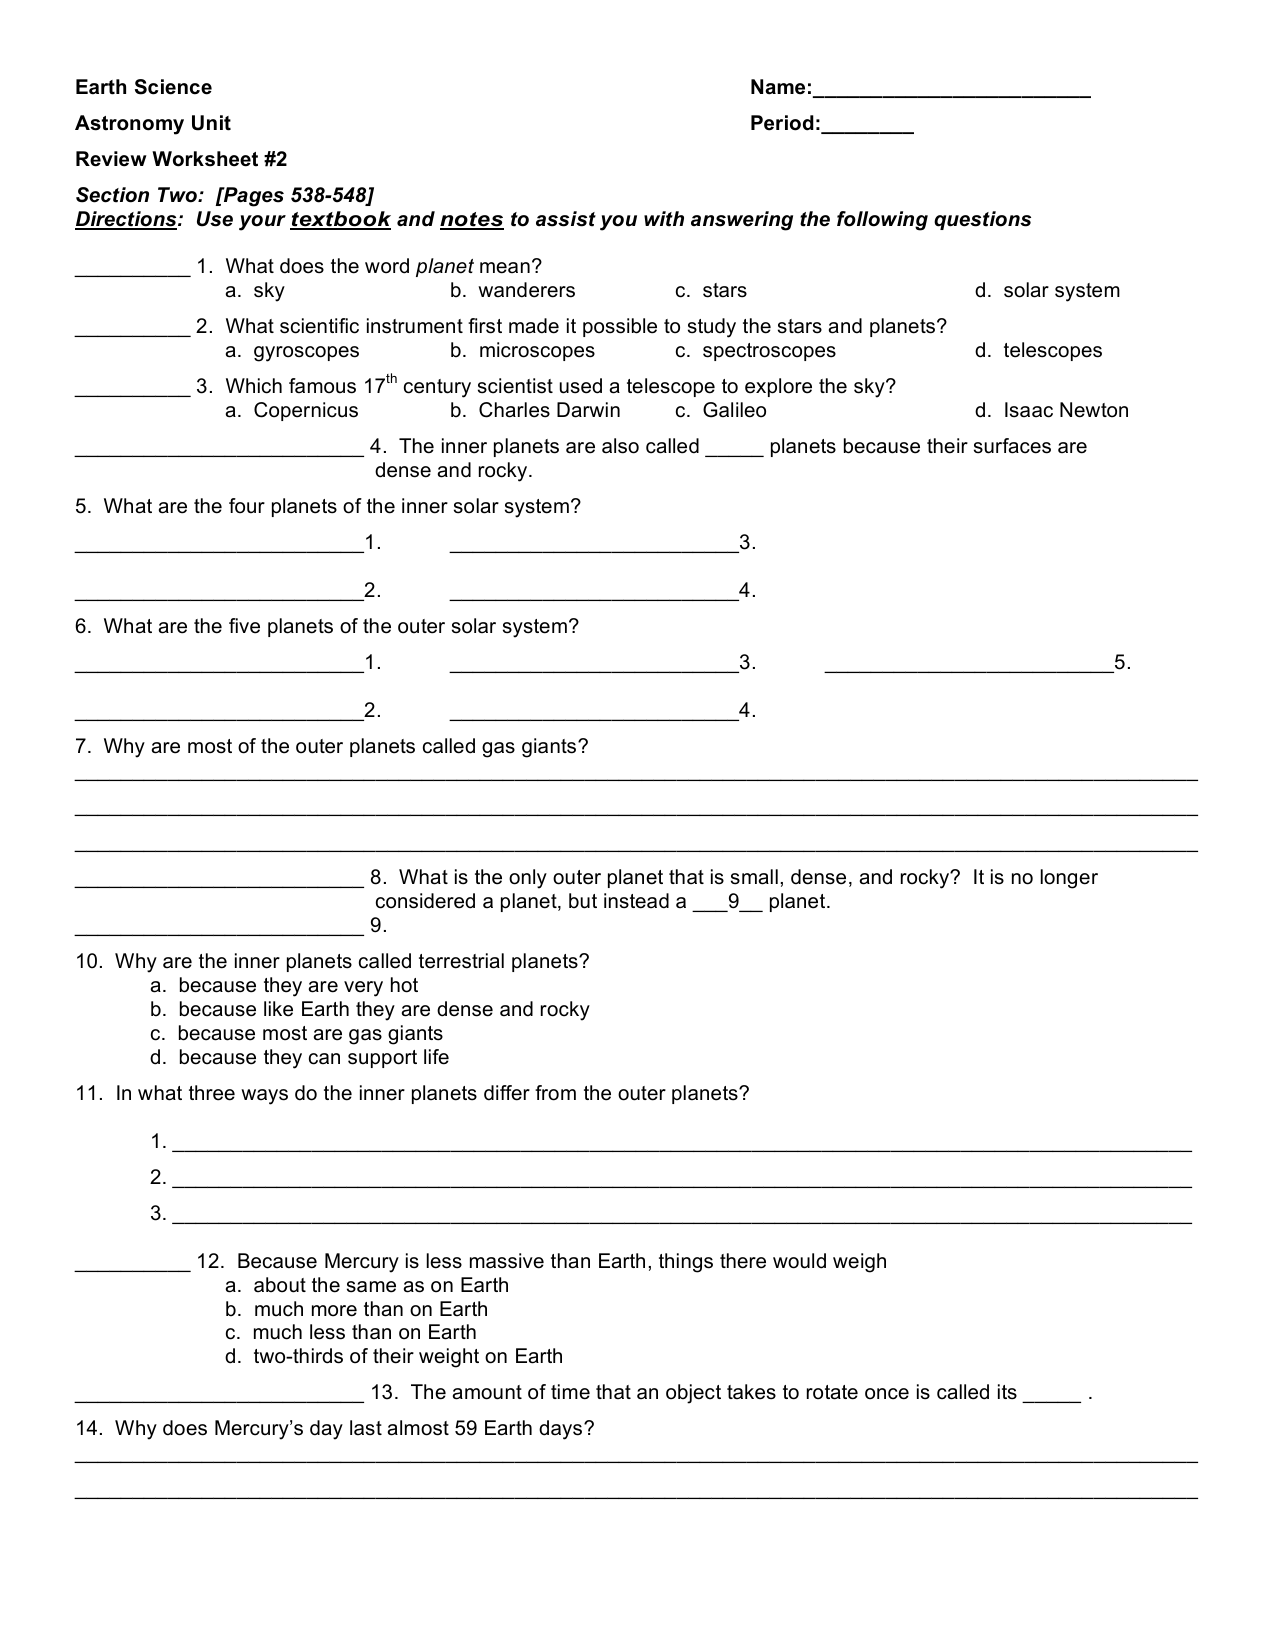 Astronomy Review Worksheet 2